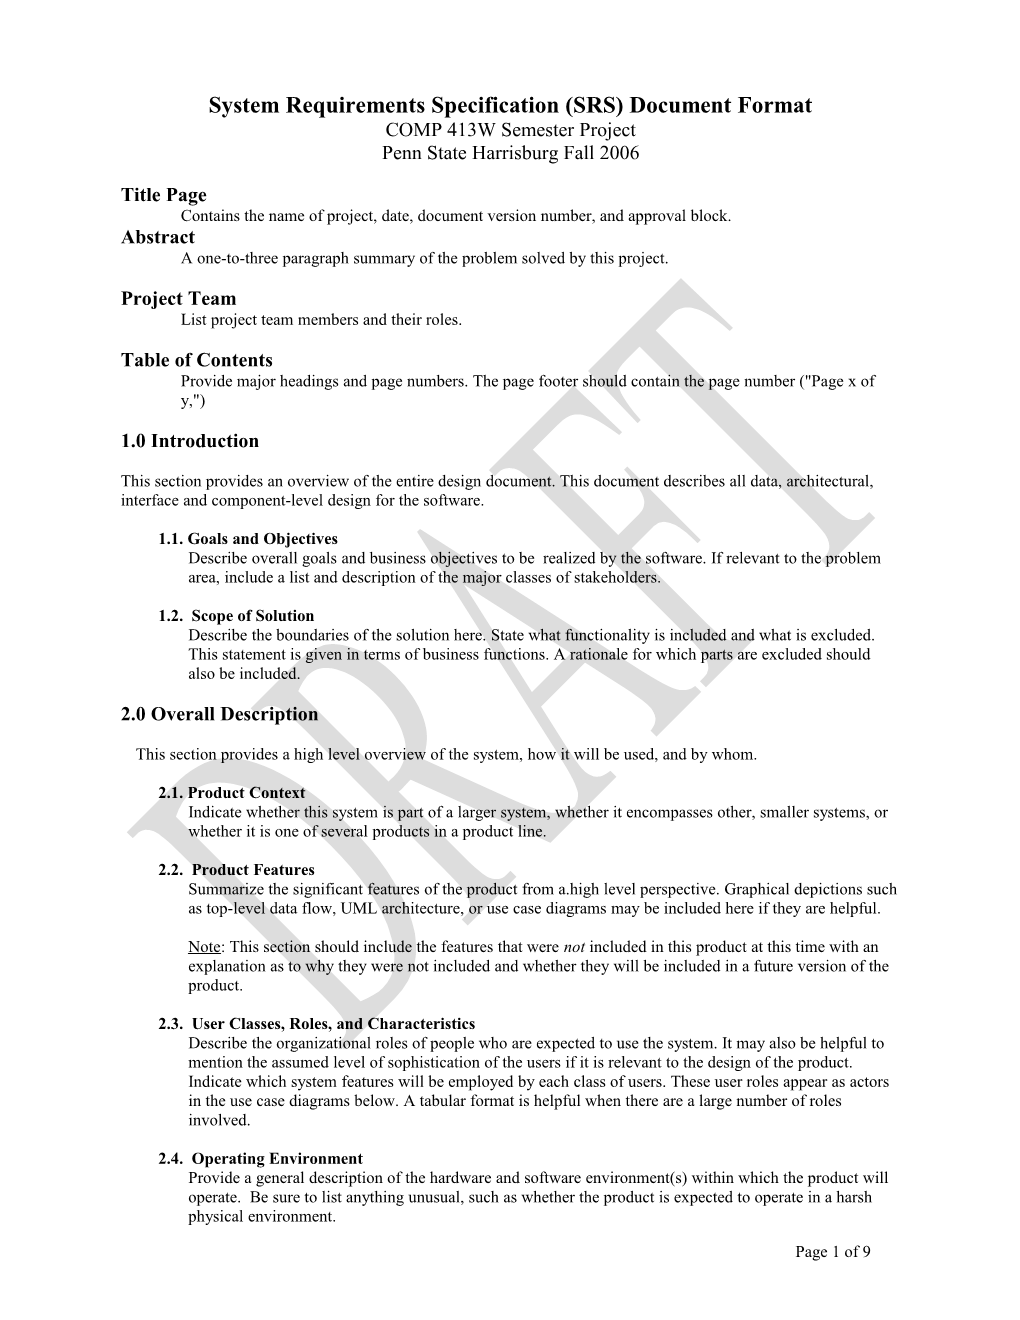 System Requirements Specification (SRS) Document Format